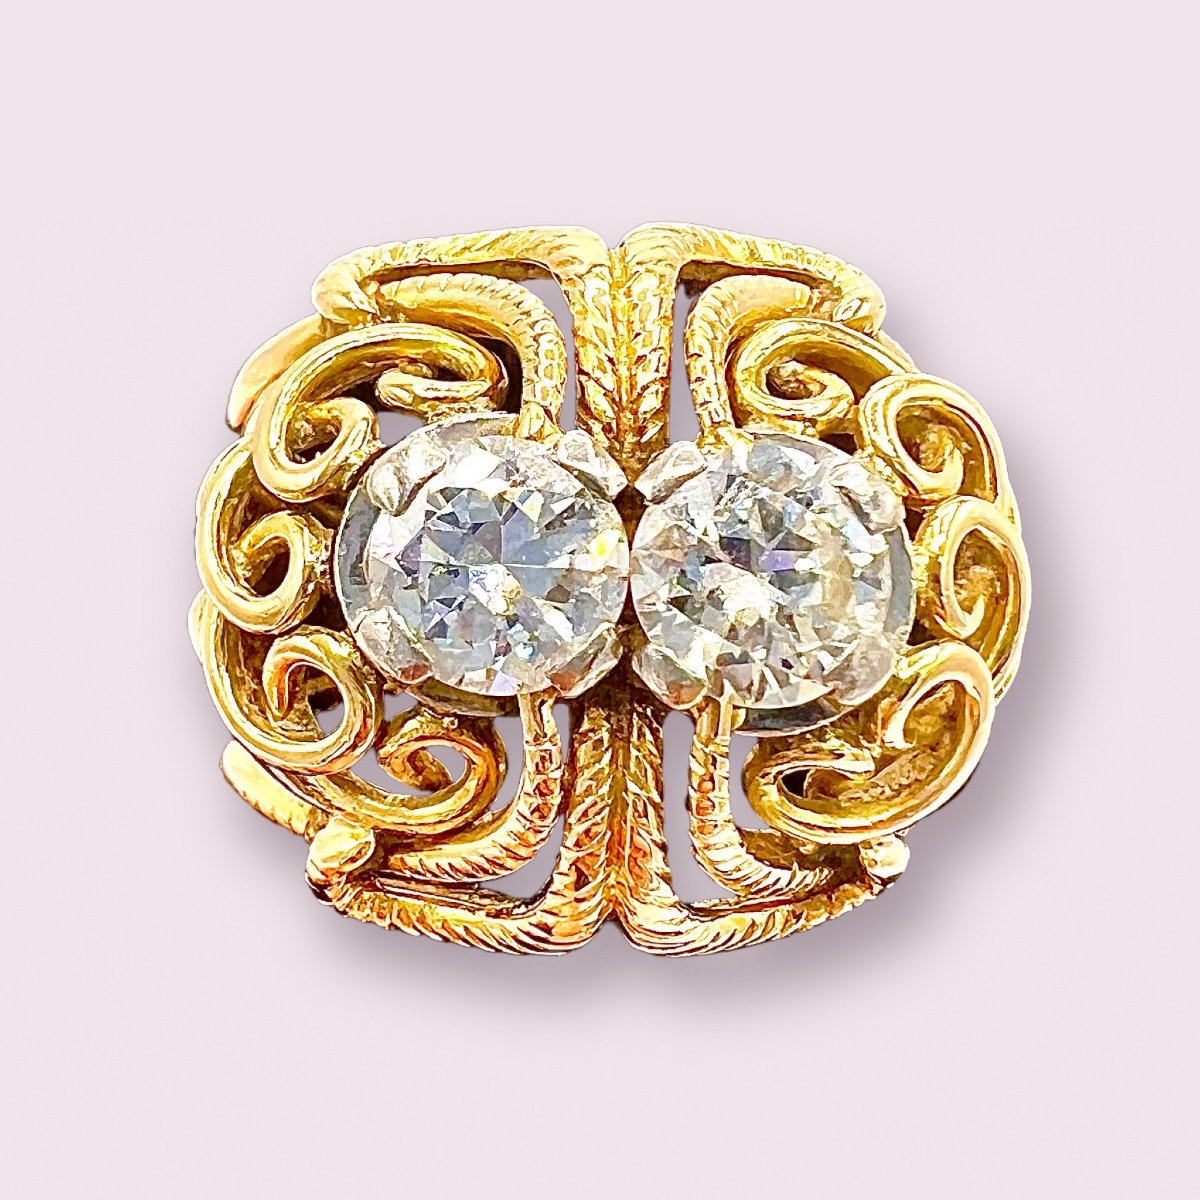 Superb Cocktail Ring From The 1950s In 18 Carat Gold, Set With Two Modern Cut Diamonds,-photo-3